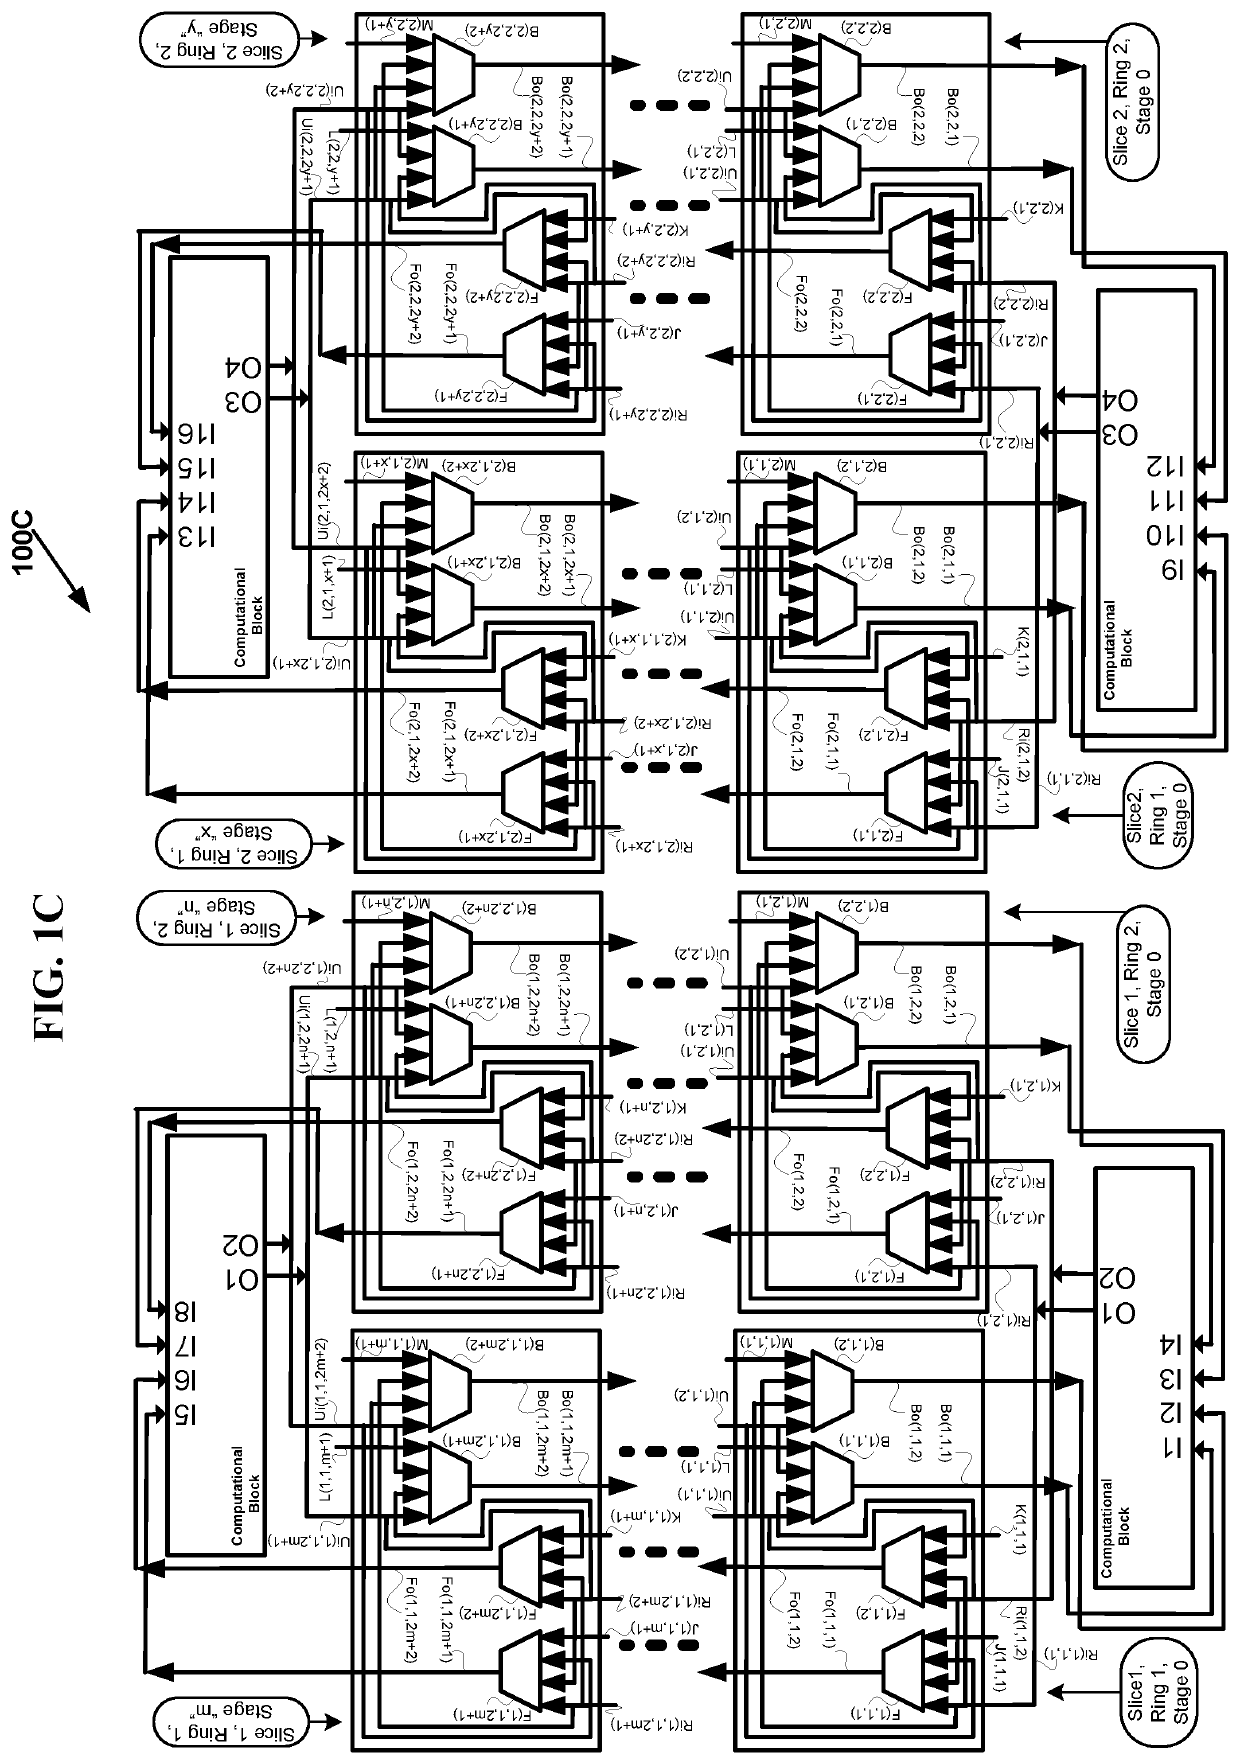 Automatic multi-stage fabric generation for FPGAs